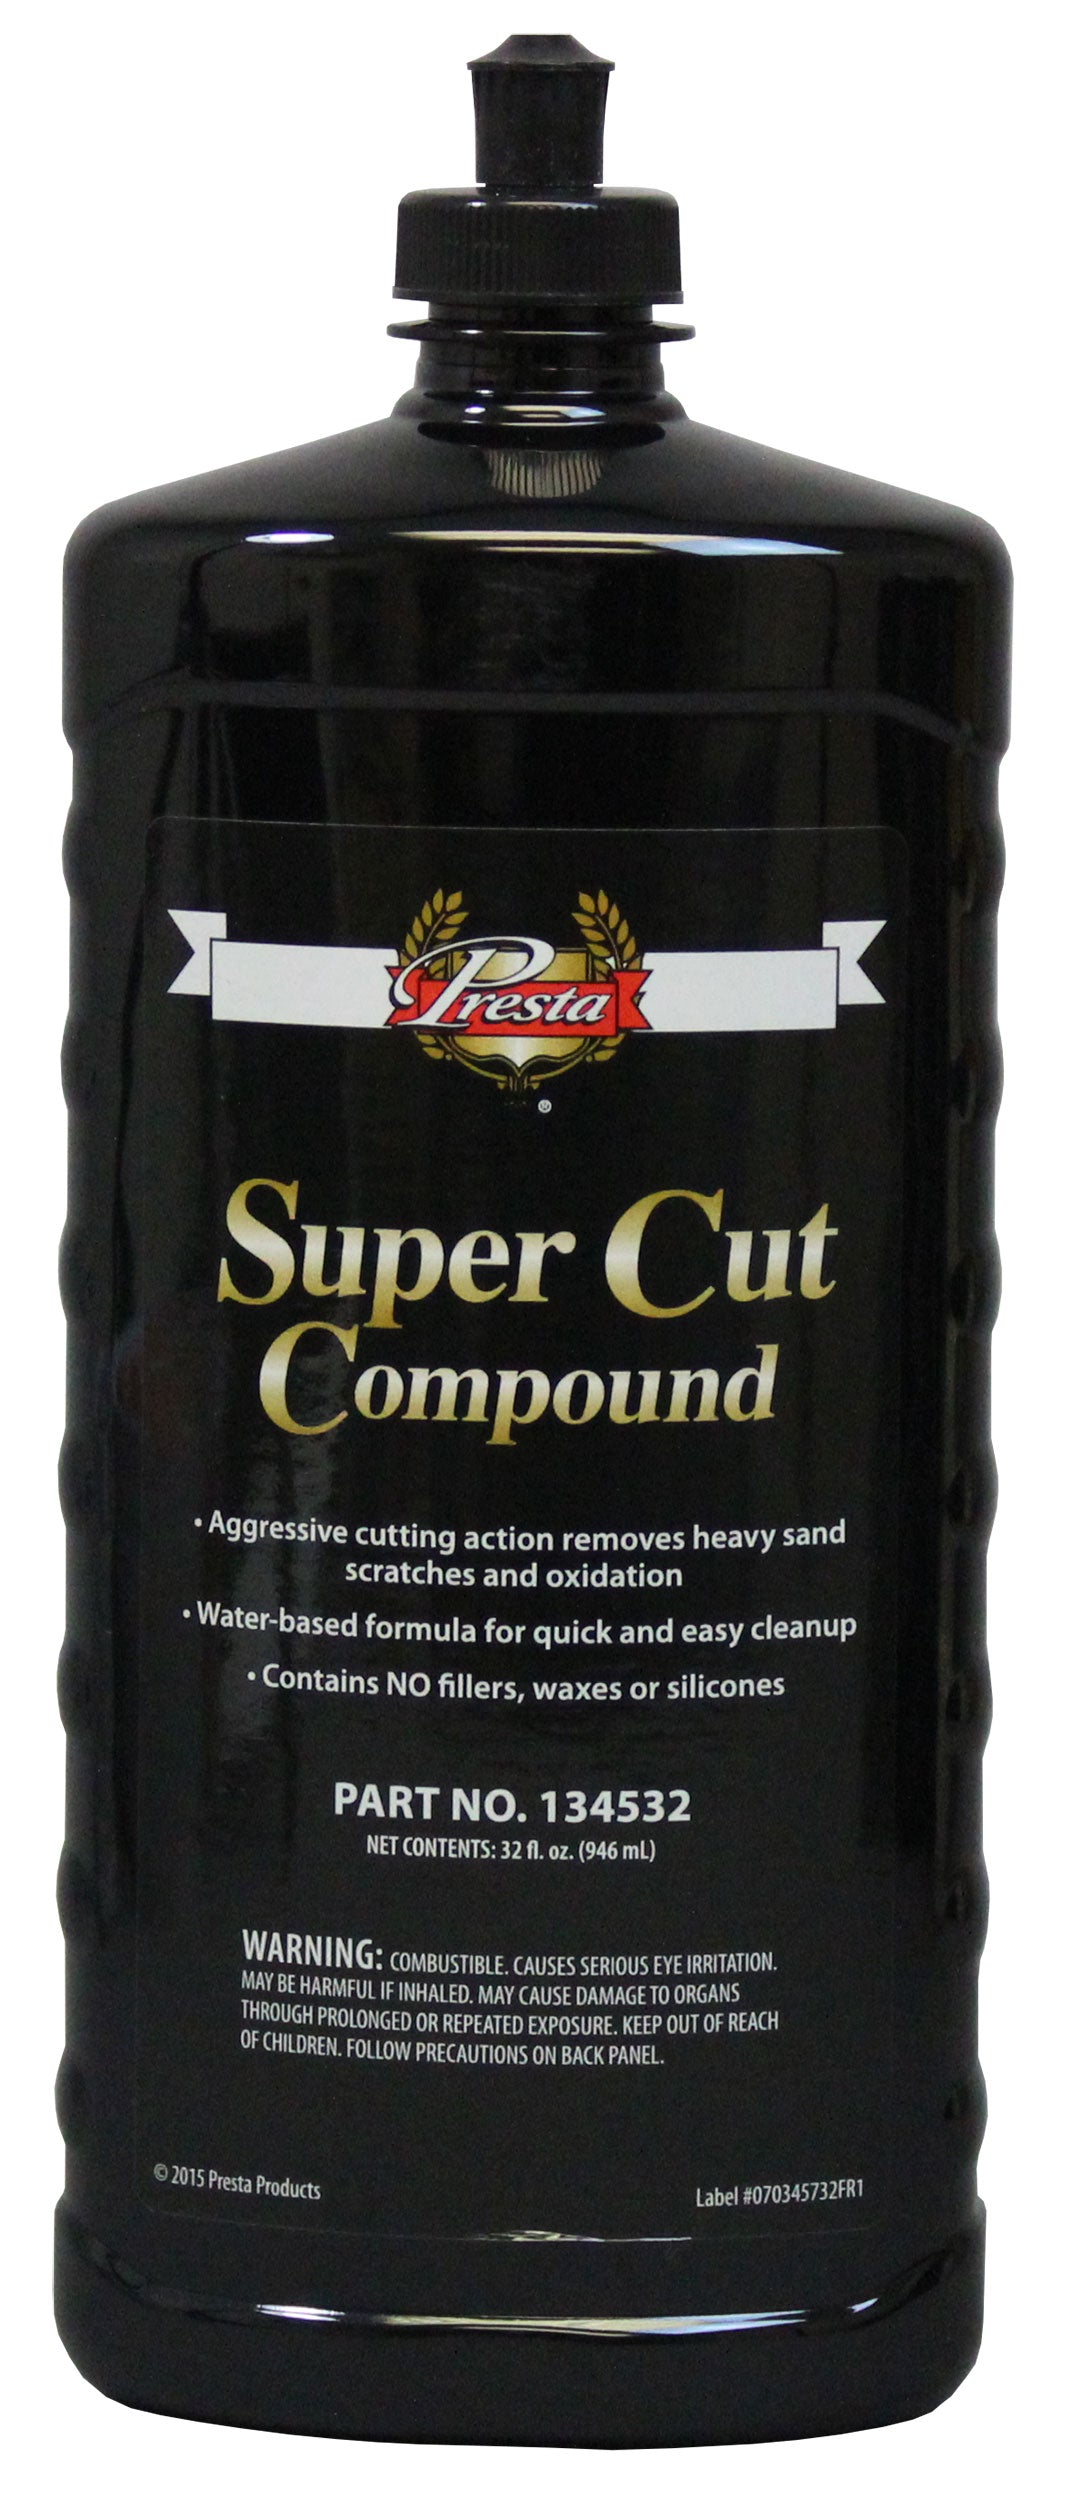 Presta 134532 Super Cut Compound for Removing P800 Grit, Heavy Sand Scratches and Oxidation - 32 Oz.